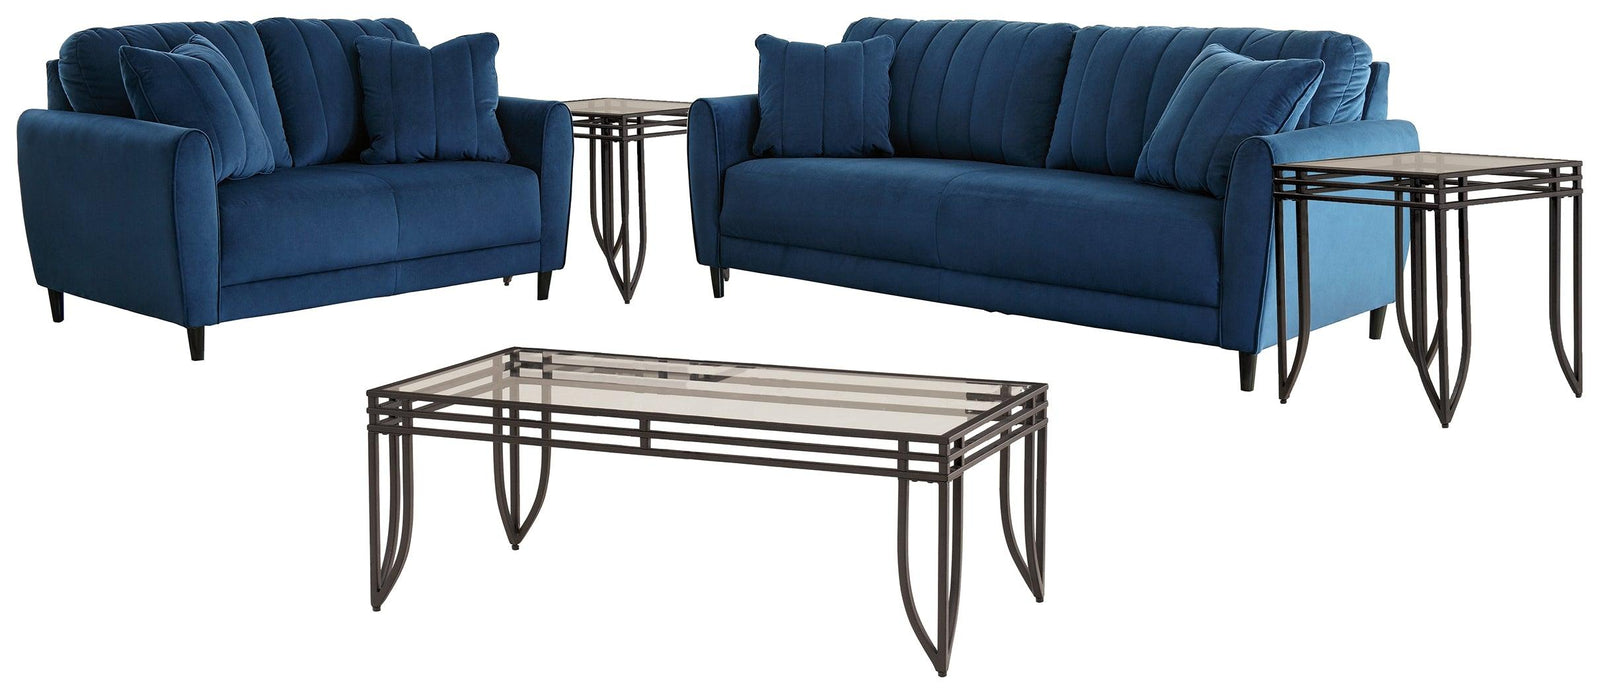 Enderlin Ink Sofa And Loveseat With Coffee Table And 2 End Tables